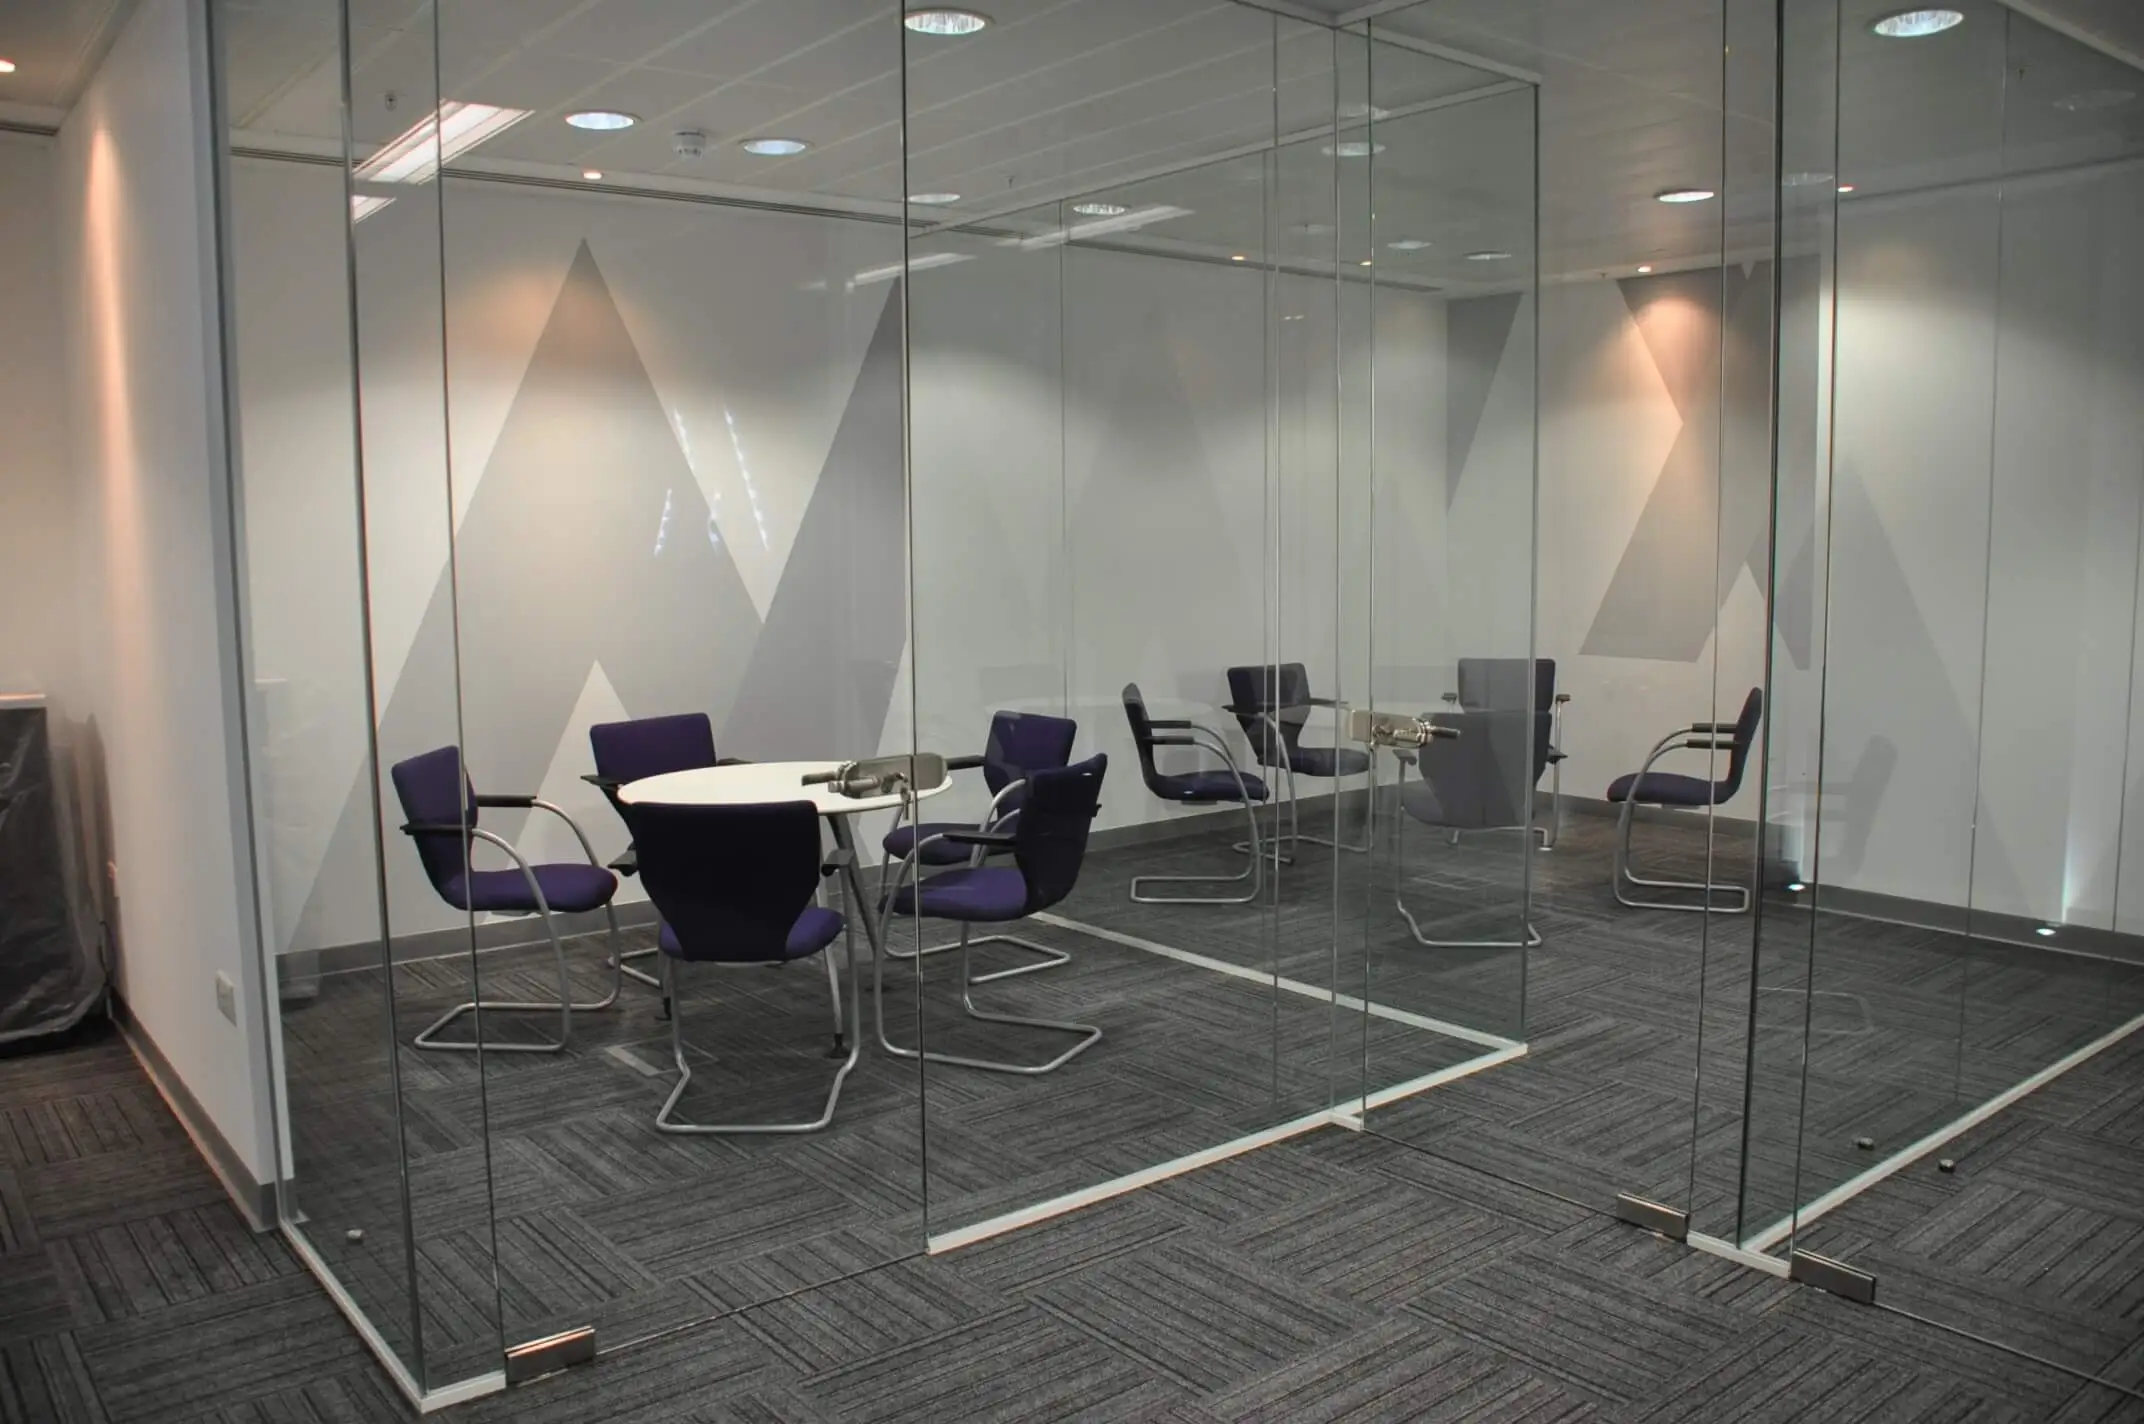 Small meetings spaces with frameless glass partitions